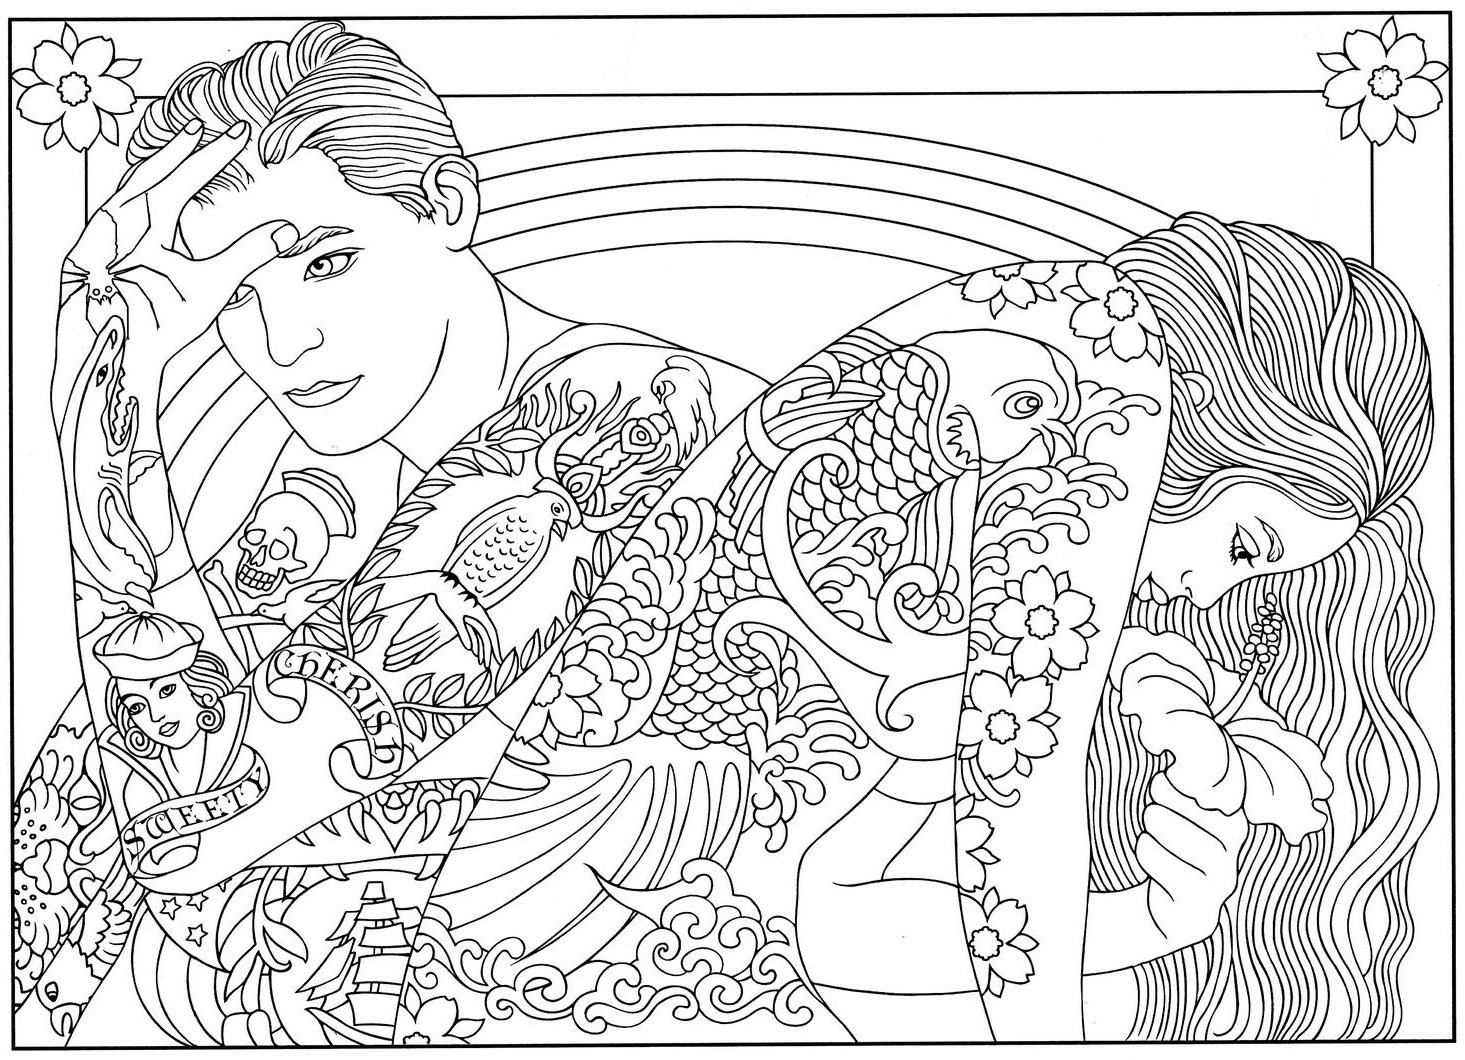 Coloring pages adult colorings rocks awesome cool tattooed couple